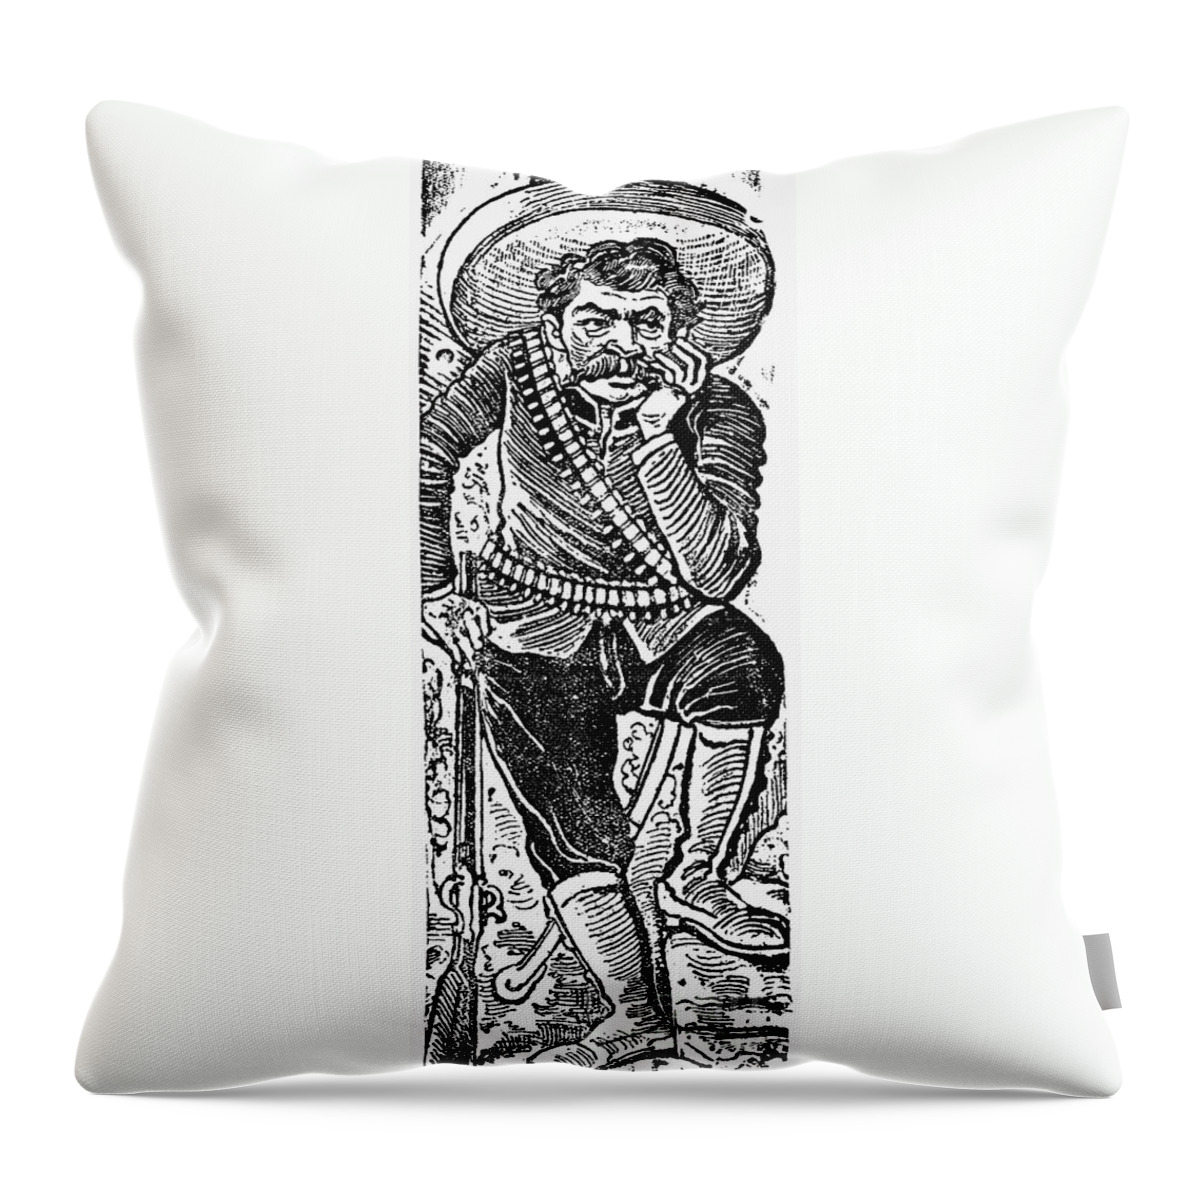 1910 Throw Pillow featuring the photograph Posada: Revolutionary #1 by Granger